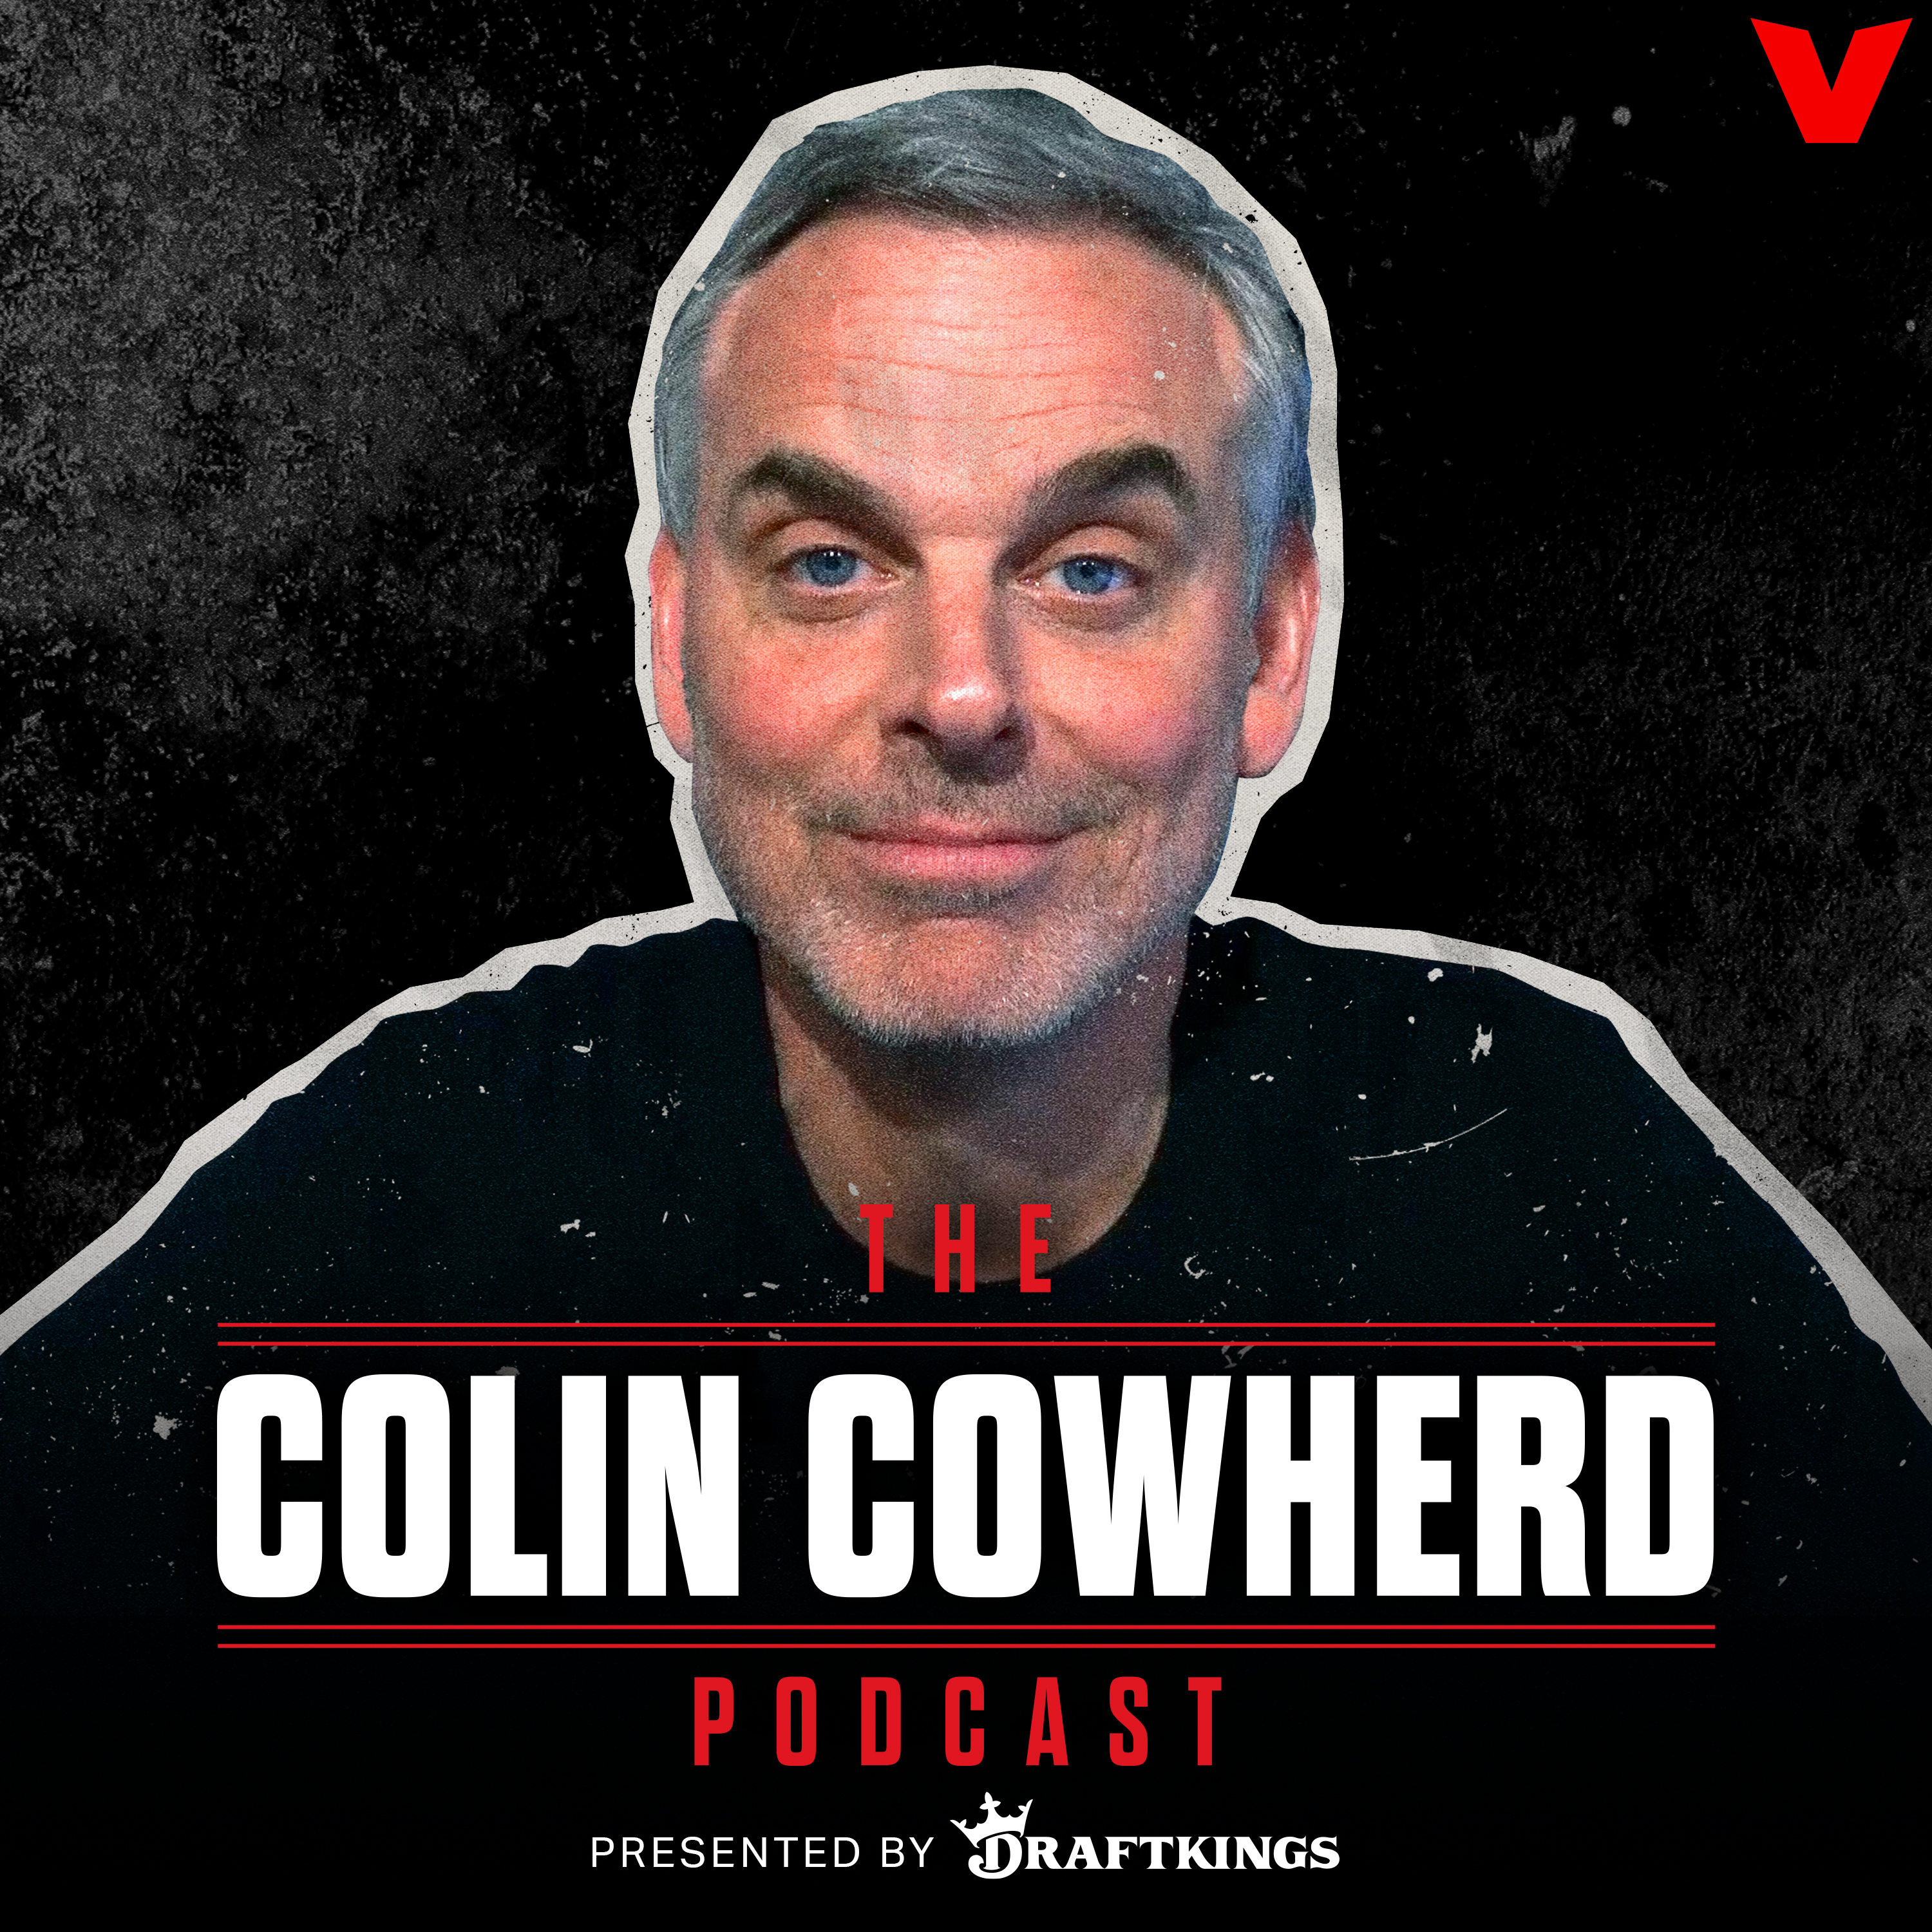 Colin Cowherd Podcast - Untold Stories on Aaron Rodgers: Jets, Packers, Saleh, Favre, Family divorce